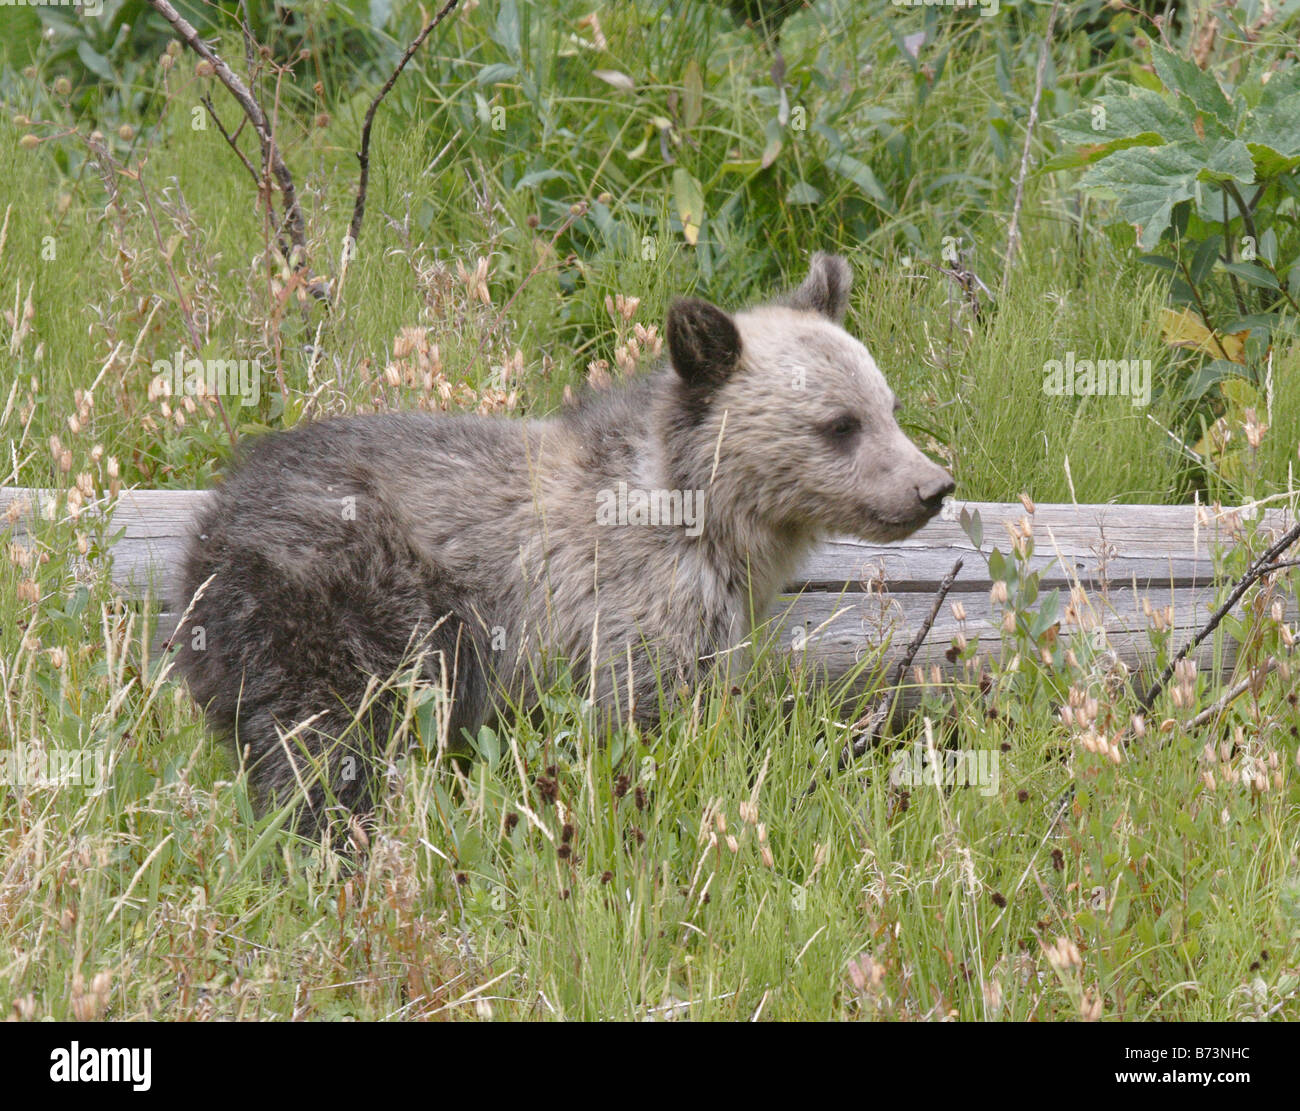 Grizzly Bear cub in Yellowstone National Park Stock Photo - Alamy